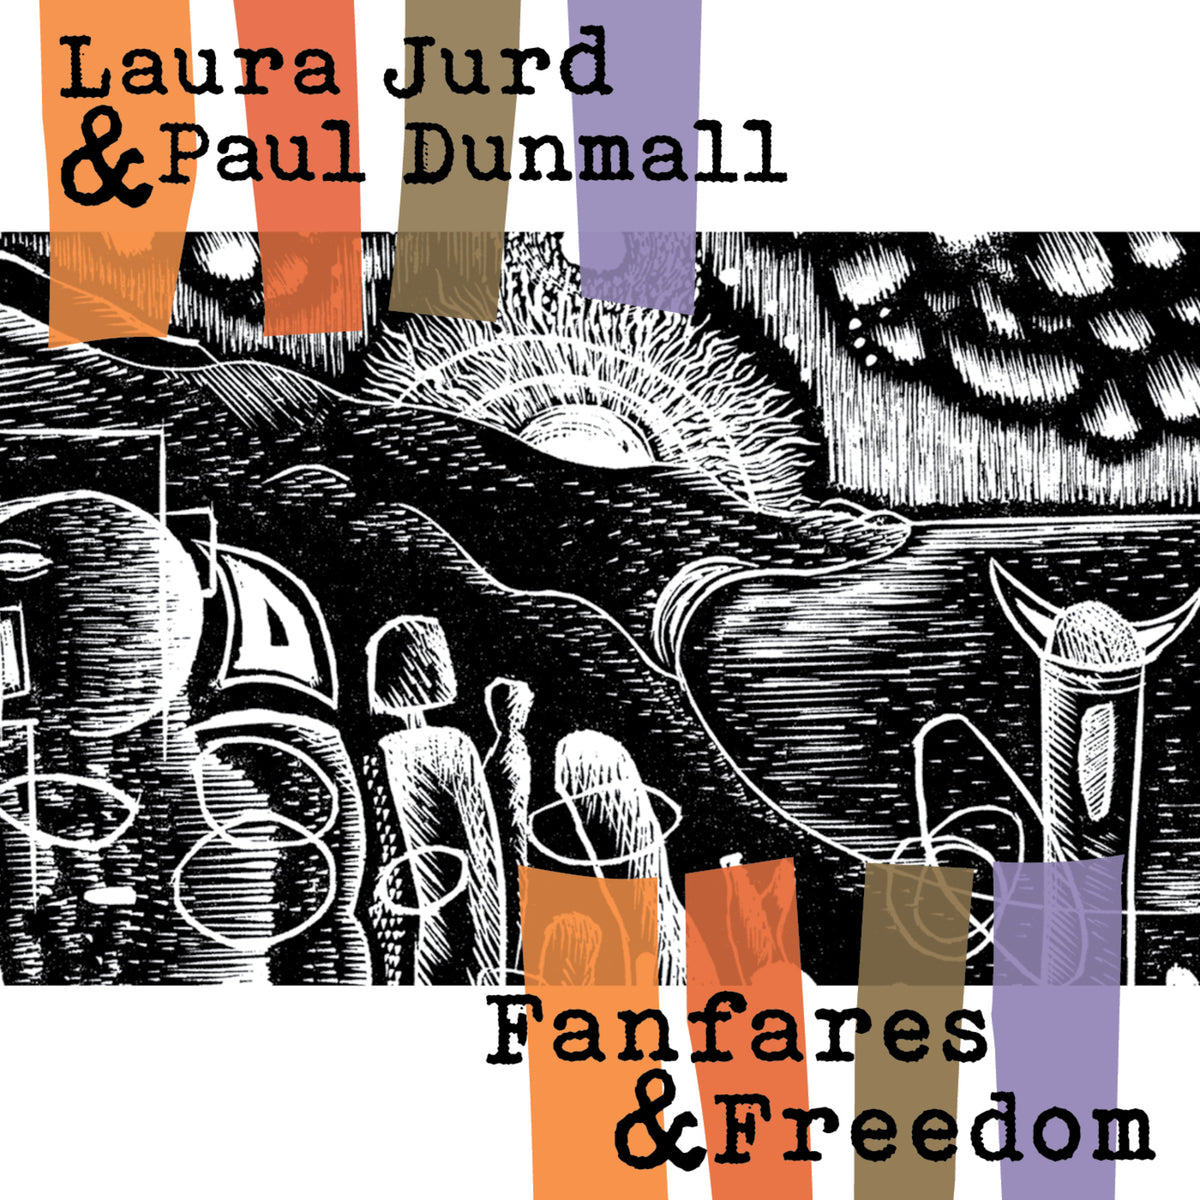 Laura Jurd & Paul Dunmall - Fanfares and Freedom - DISCUS181CD